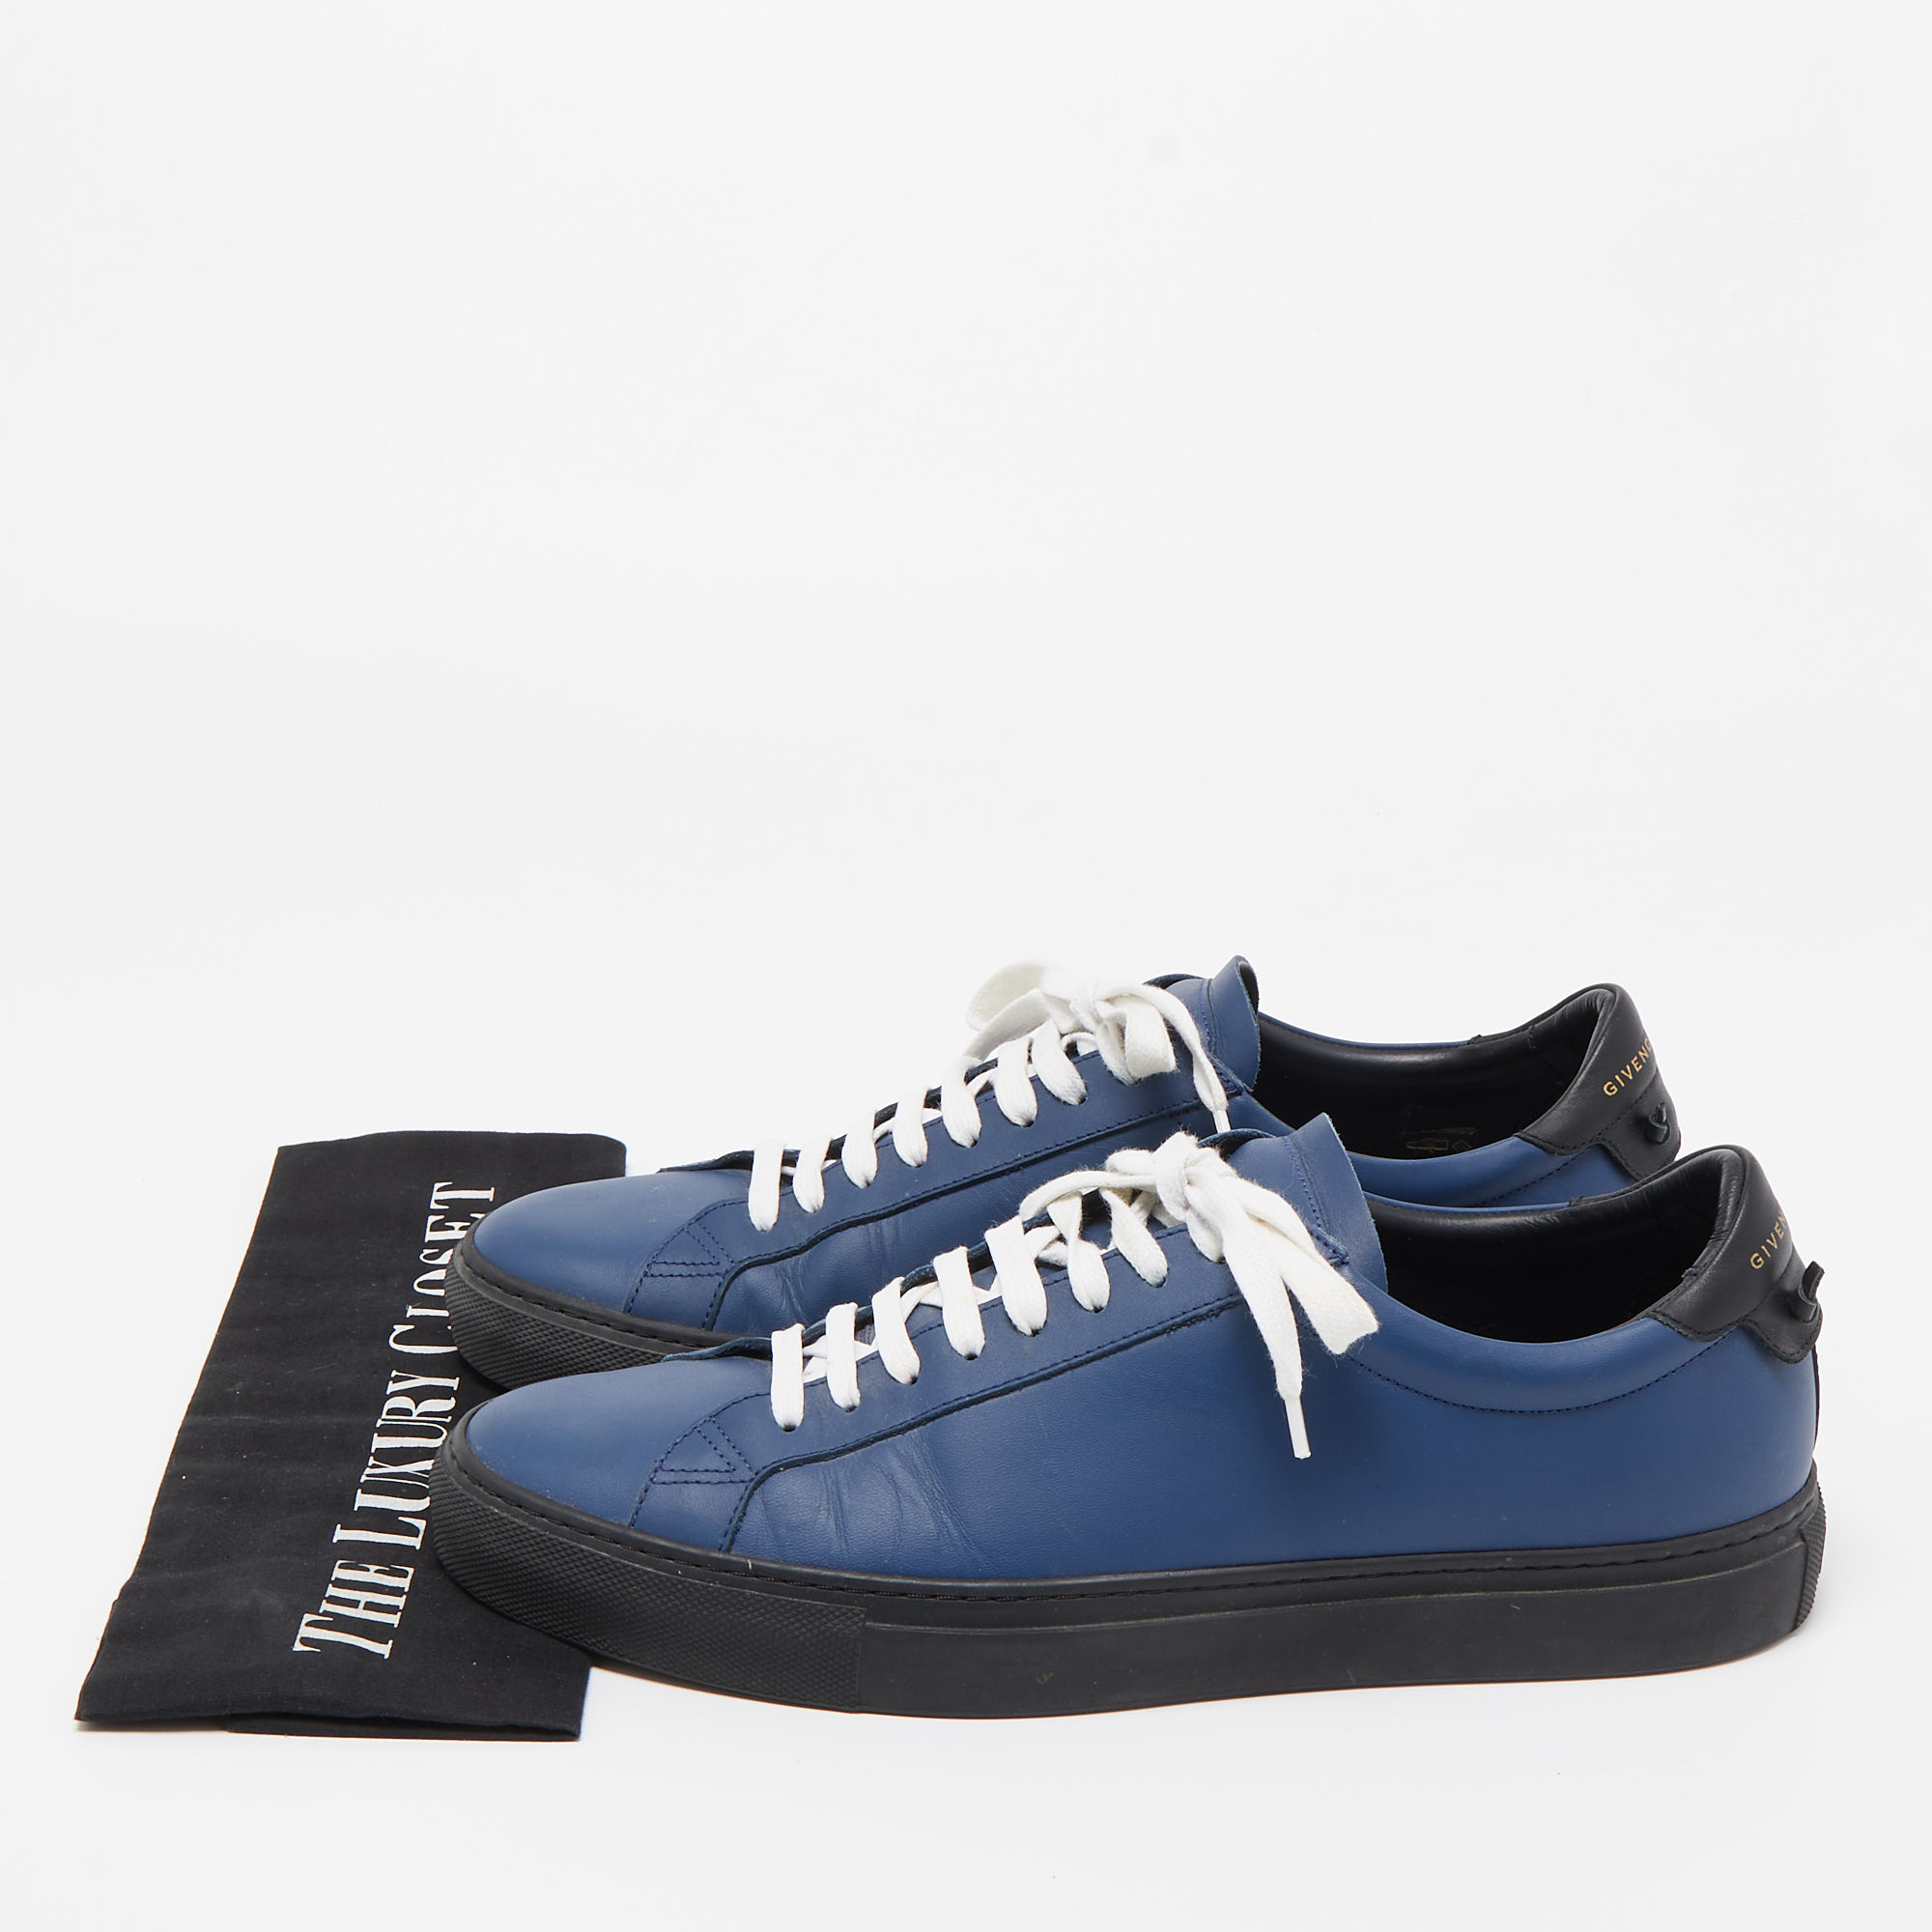 Givenchy Blue Leather Lace Up Sneakers Size 42